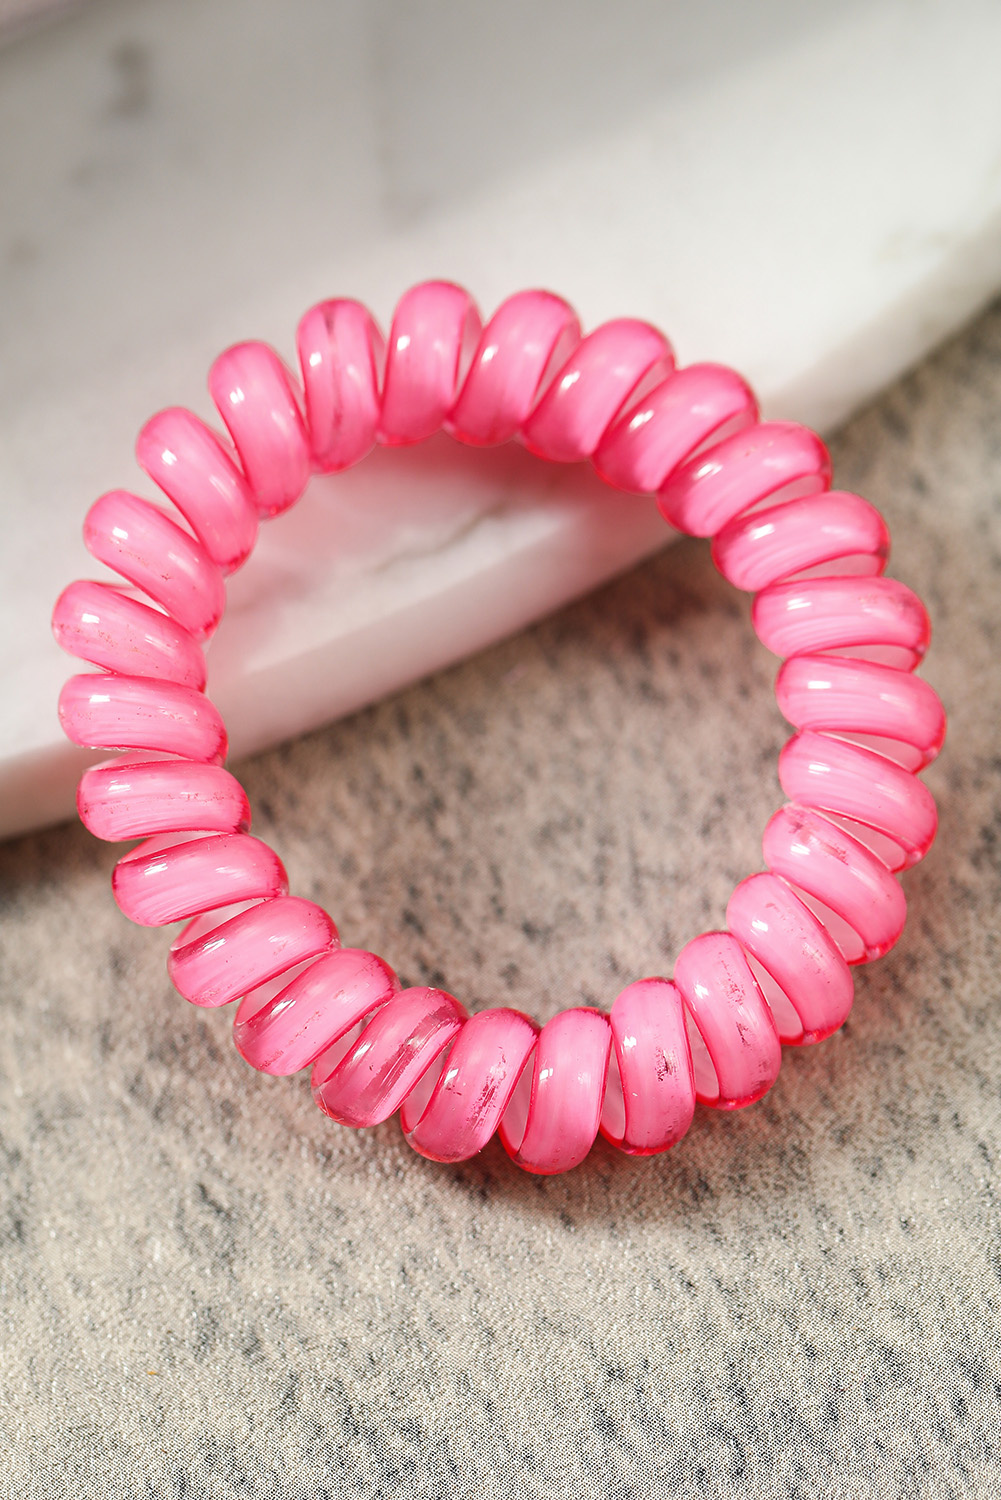 Wholesale Rosy TELEPHONE Cord Ponytail Holder Spiral Hair Tie